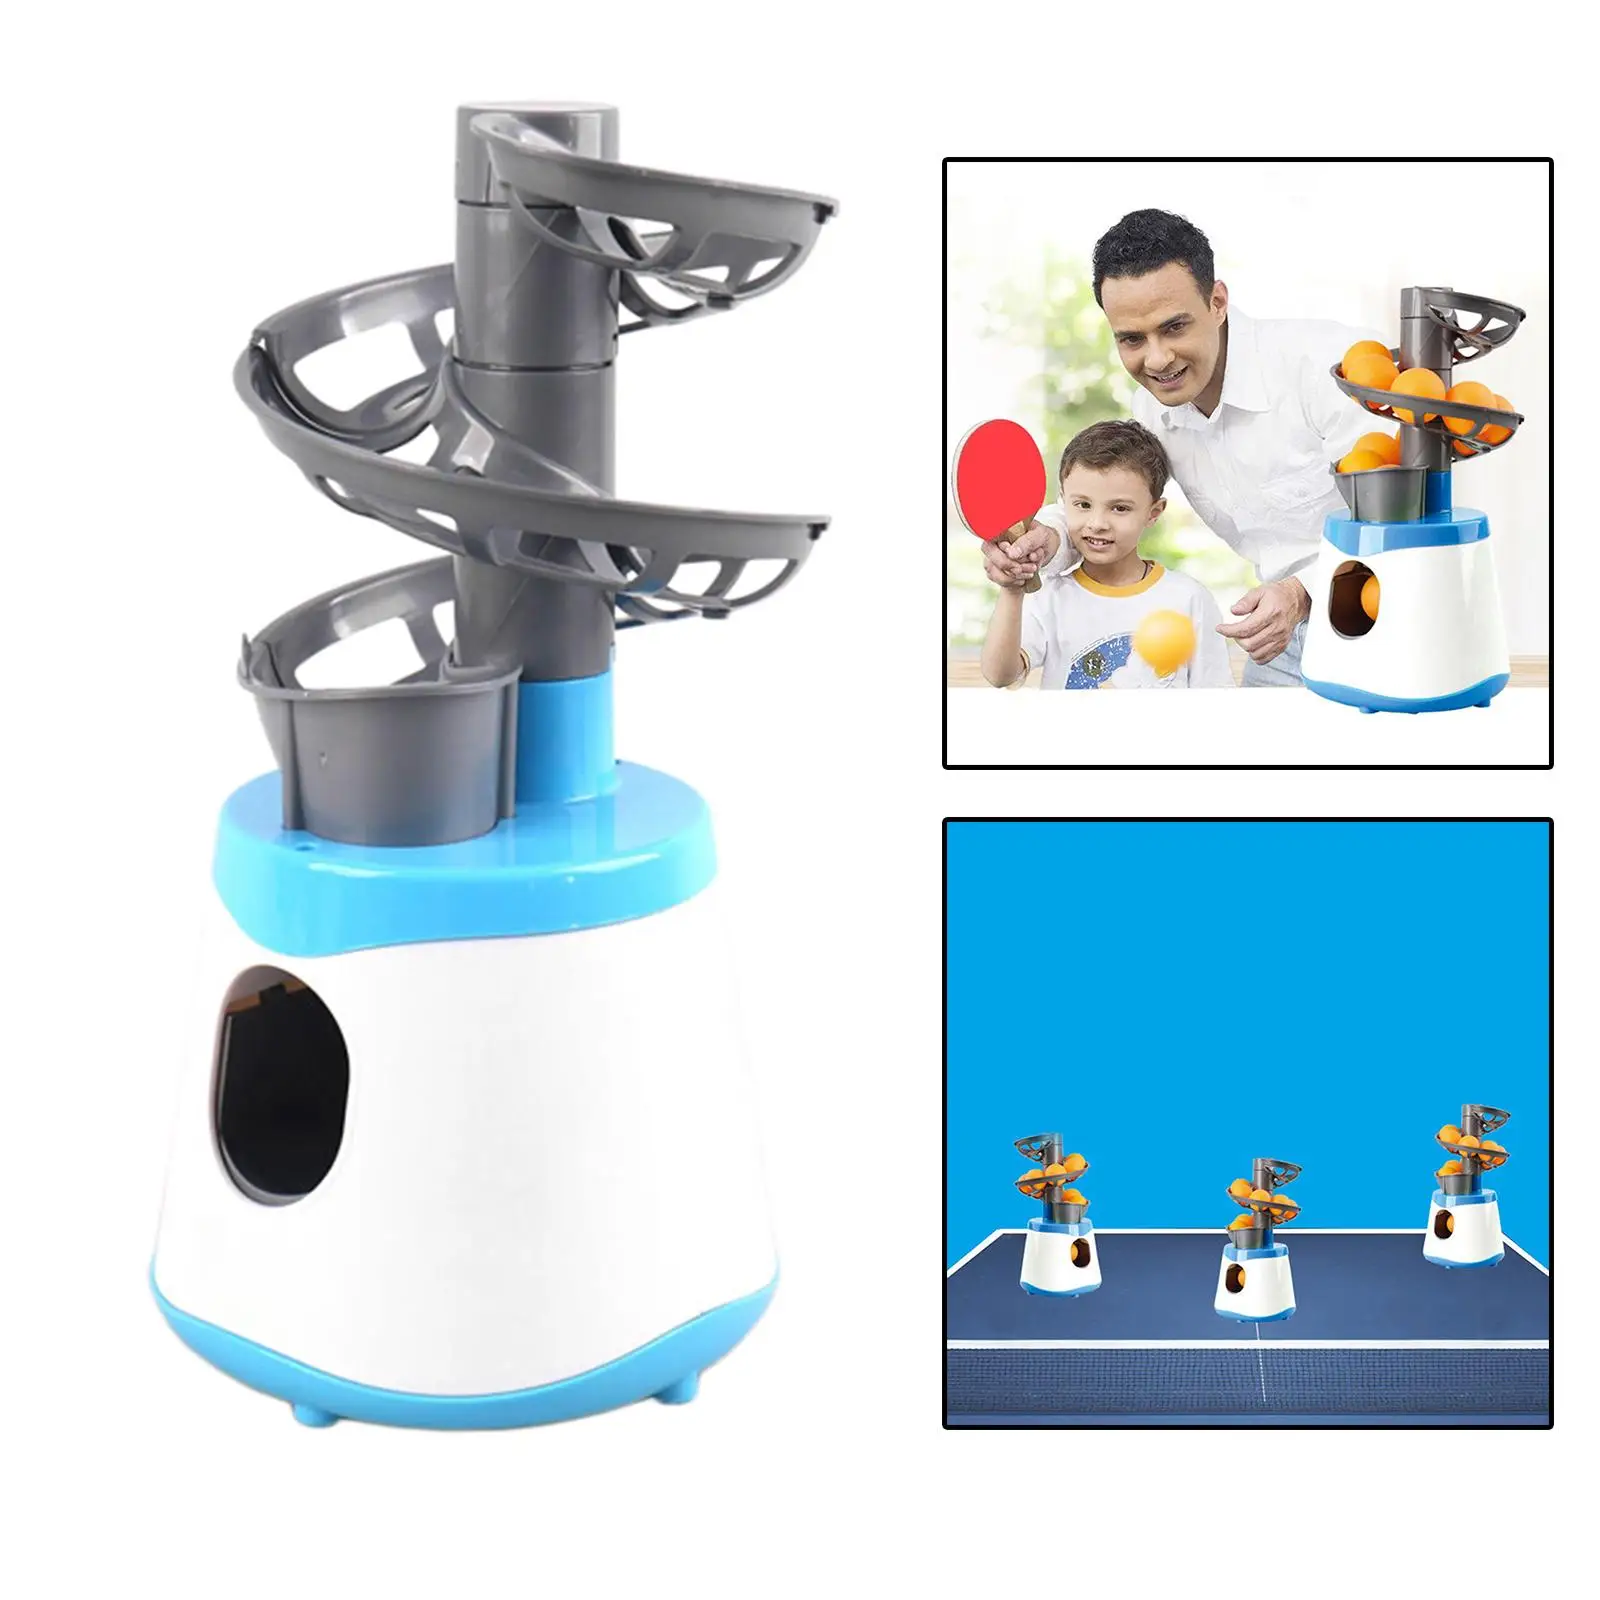 Table Tennis Robots PingPong Automatic Ball Machine Training Kids Beignners